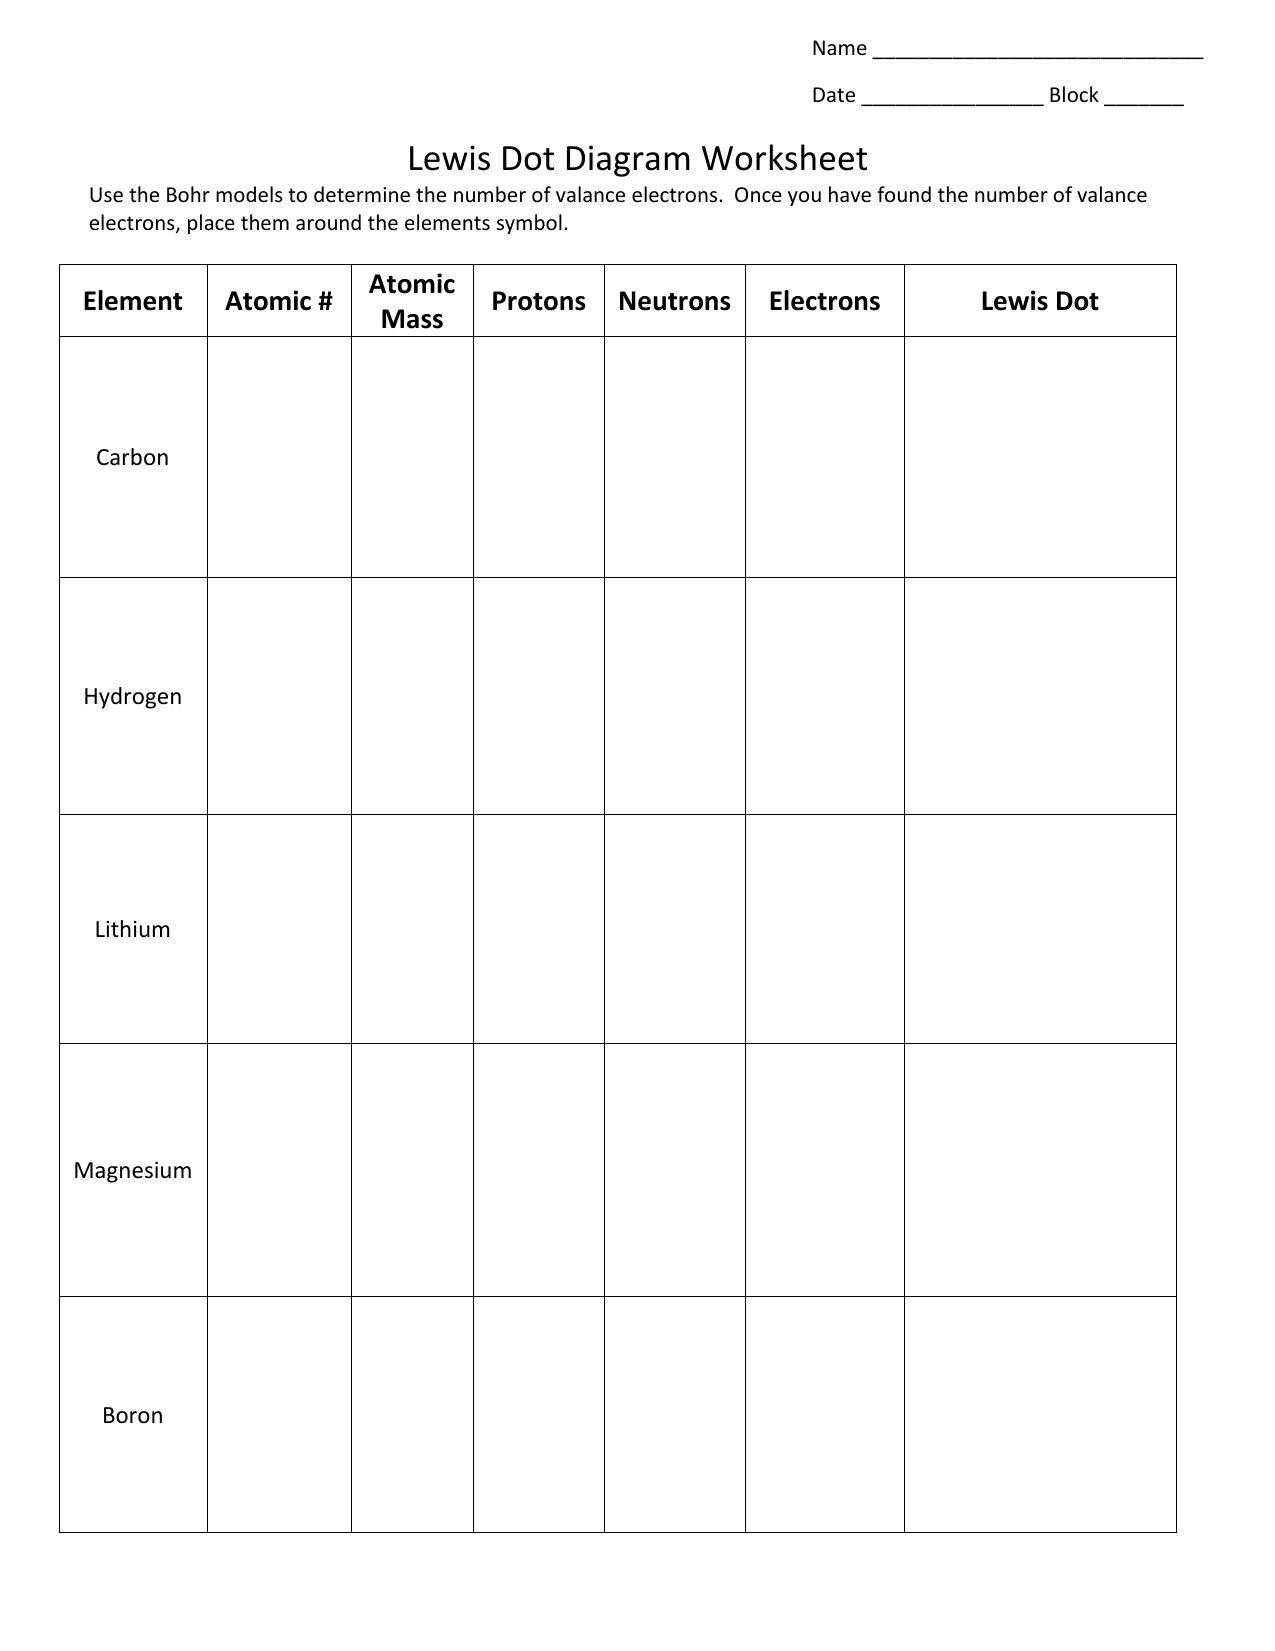 Lewis-dot-diagram-worksheet - with answers Pertaining To Lewis Dot Diagrams Worksheet Answers